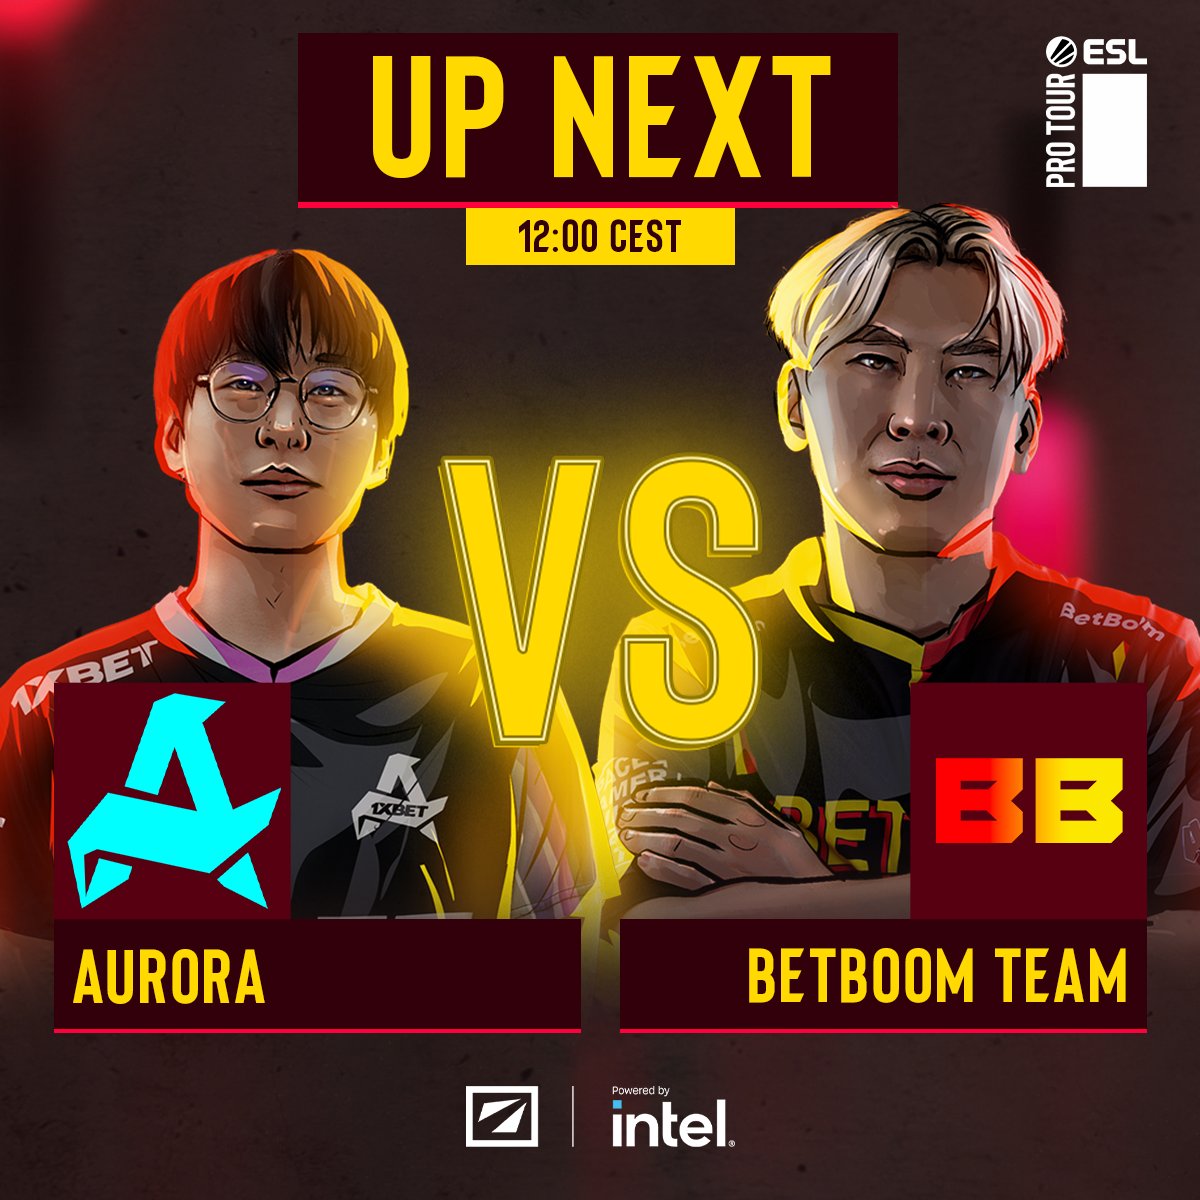 We're kicking things off today with a BANG! 💣💥 @AuroraDota2_GG face @BetBoomTeam in a Bo3 elimination series! 😰#DreamLeague